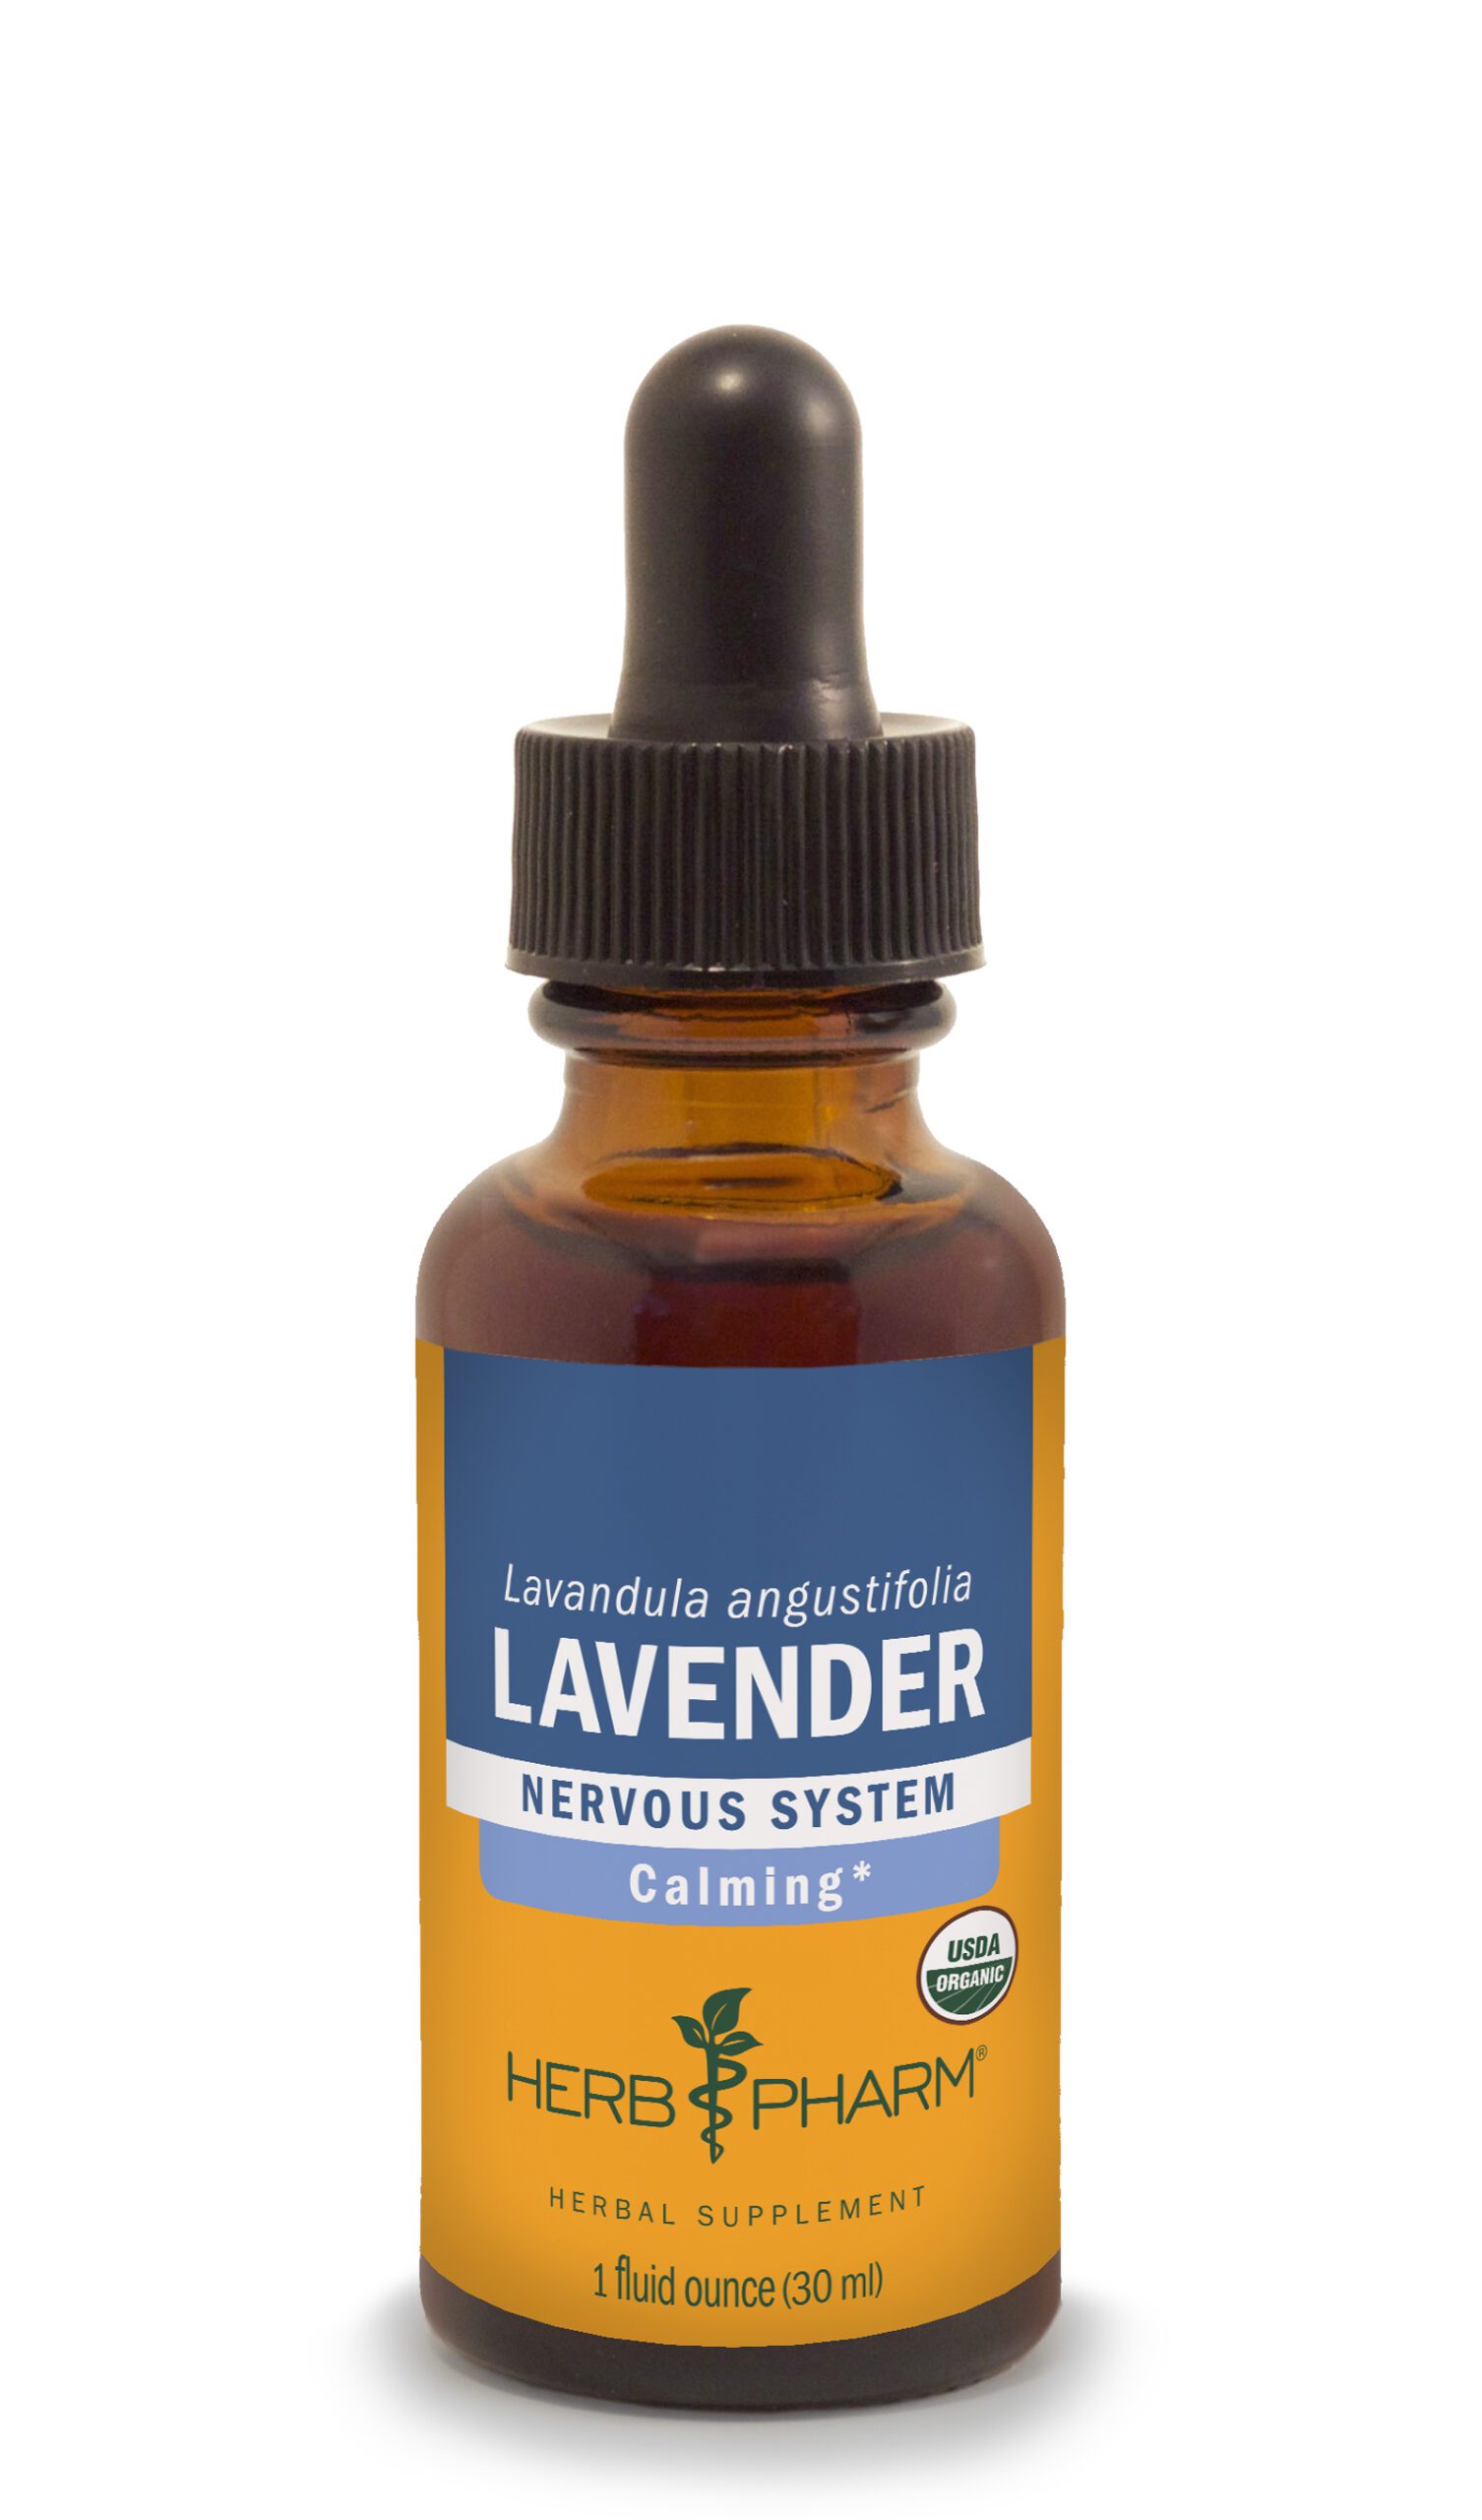 Product Listing Image for Herb Pharm Lavender Tincture 1oz